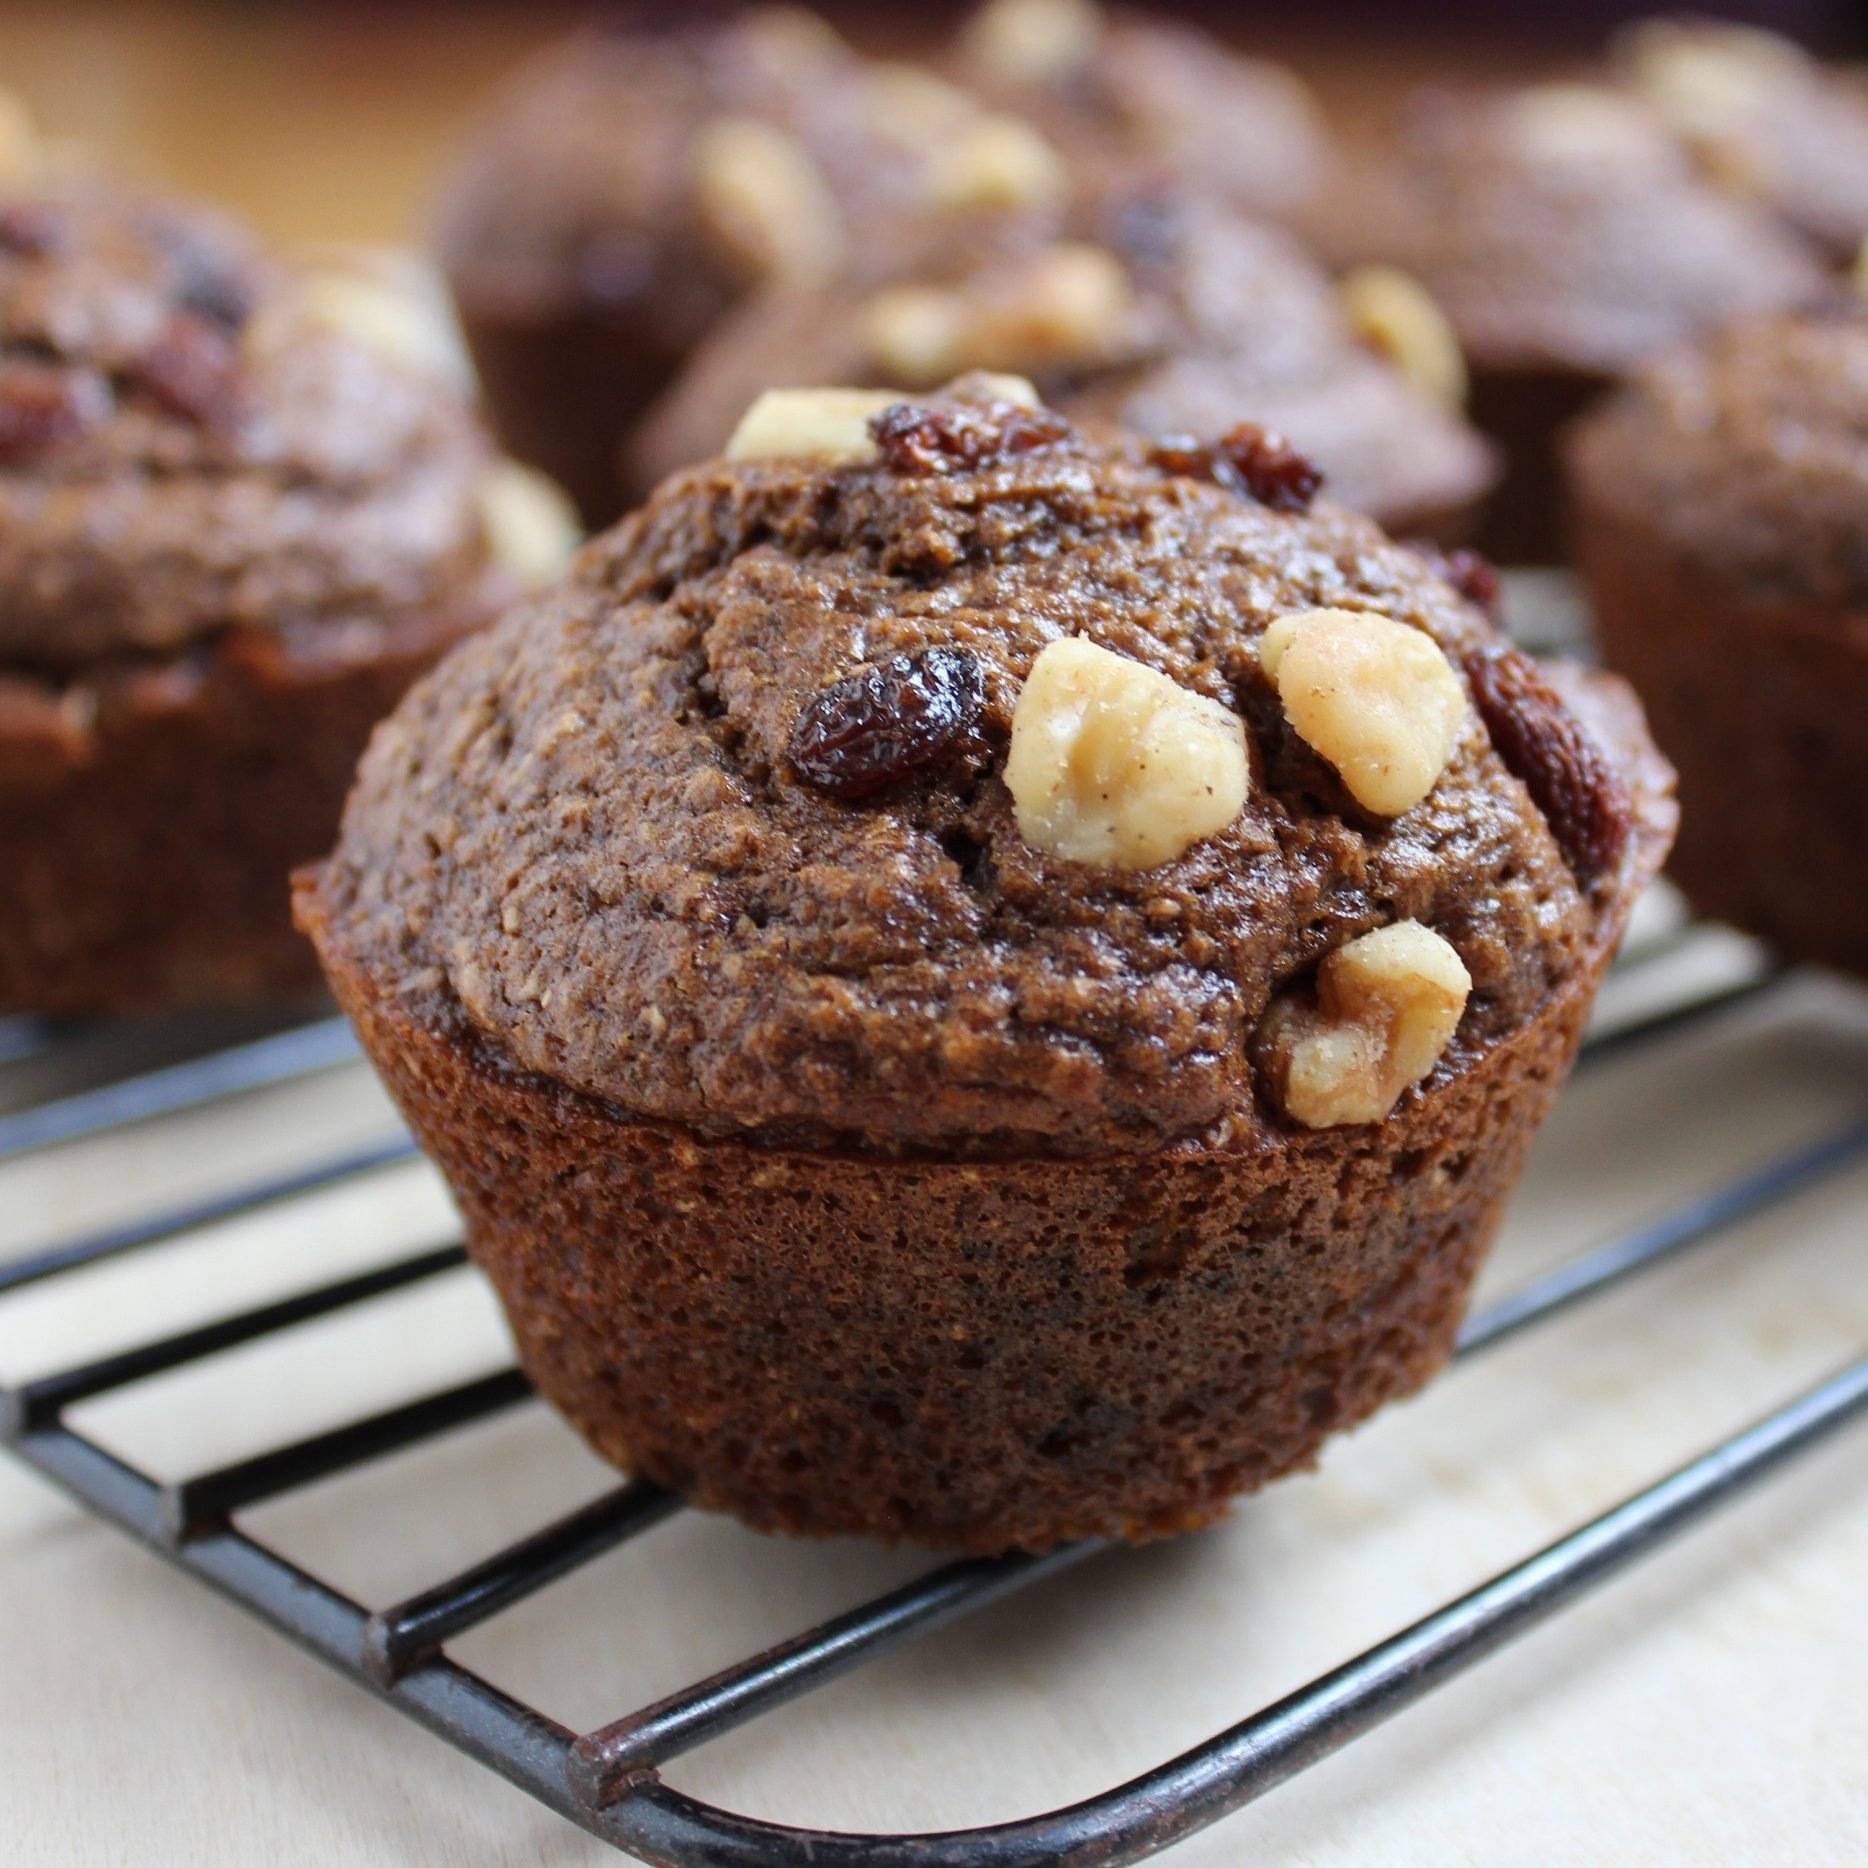 The Bran Muffin Recipe this Nutritionist Swears By | The Healthy